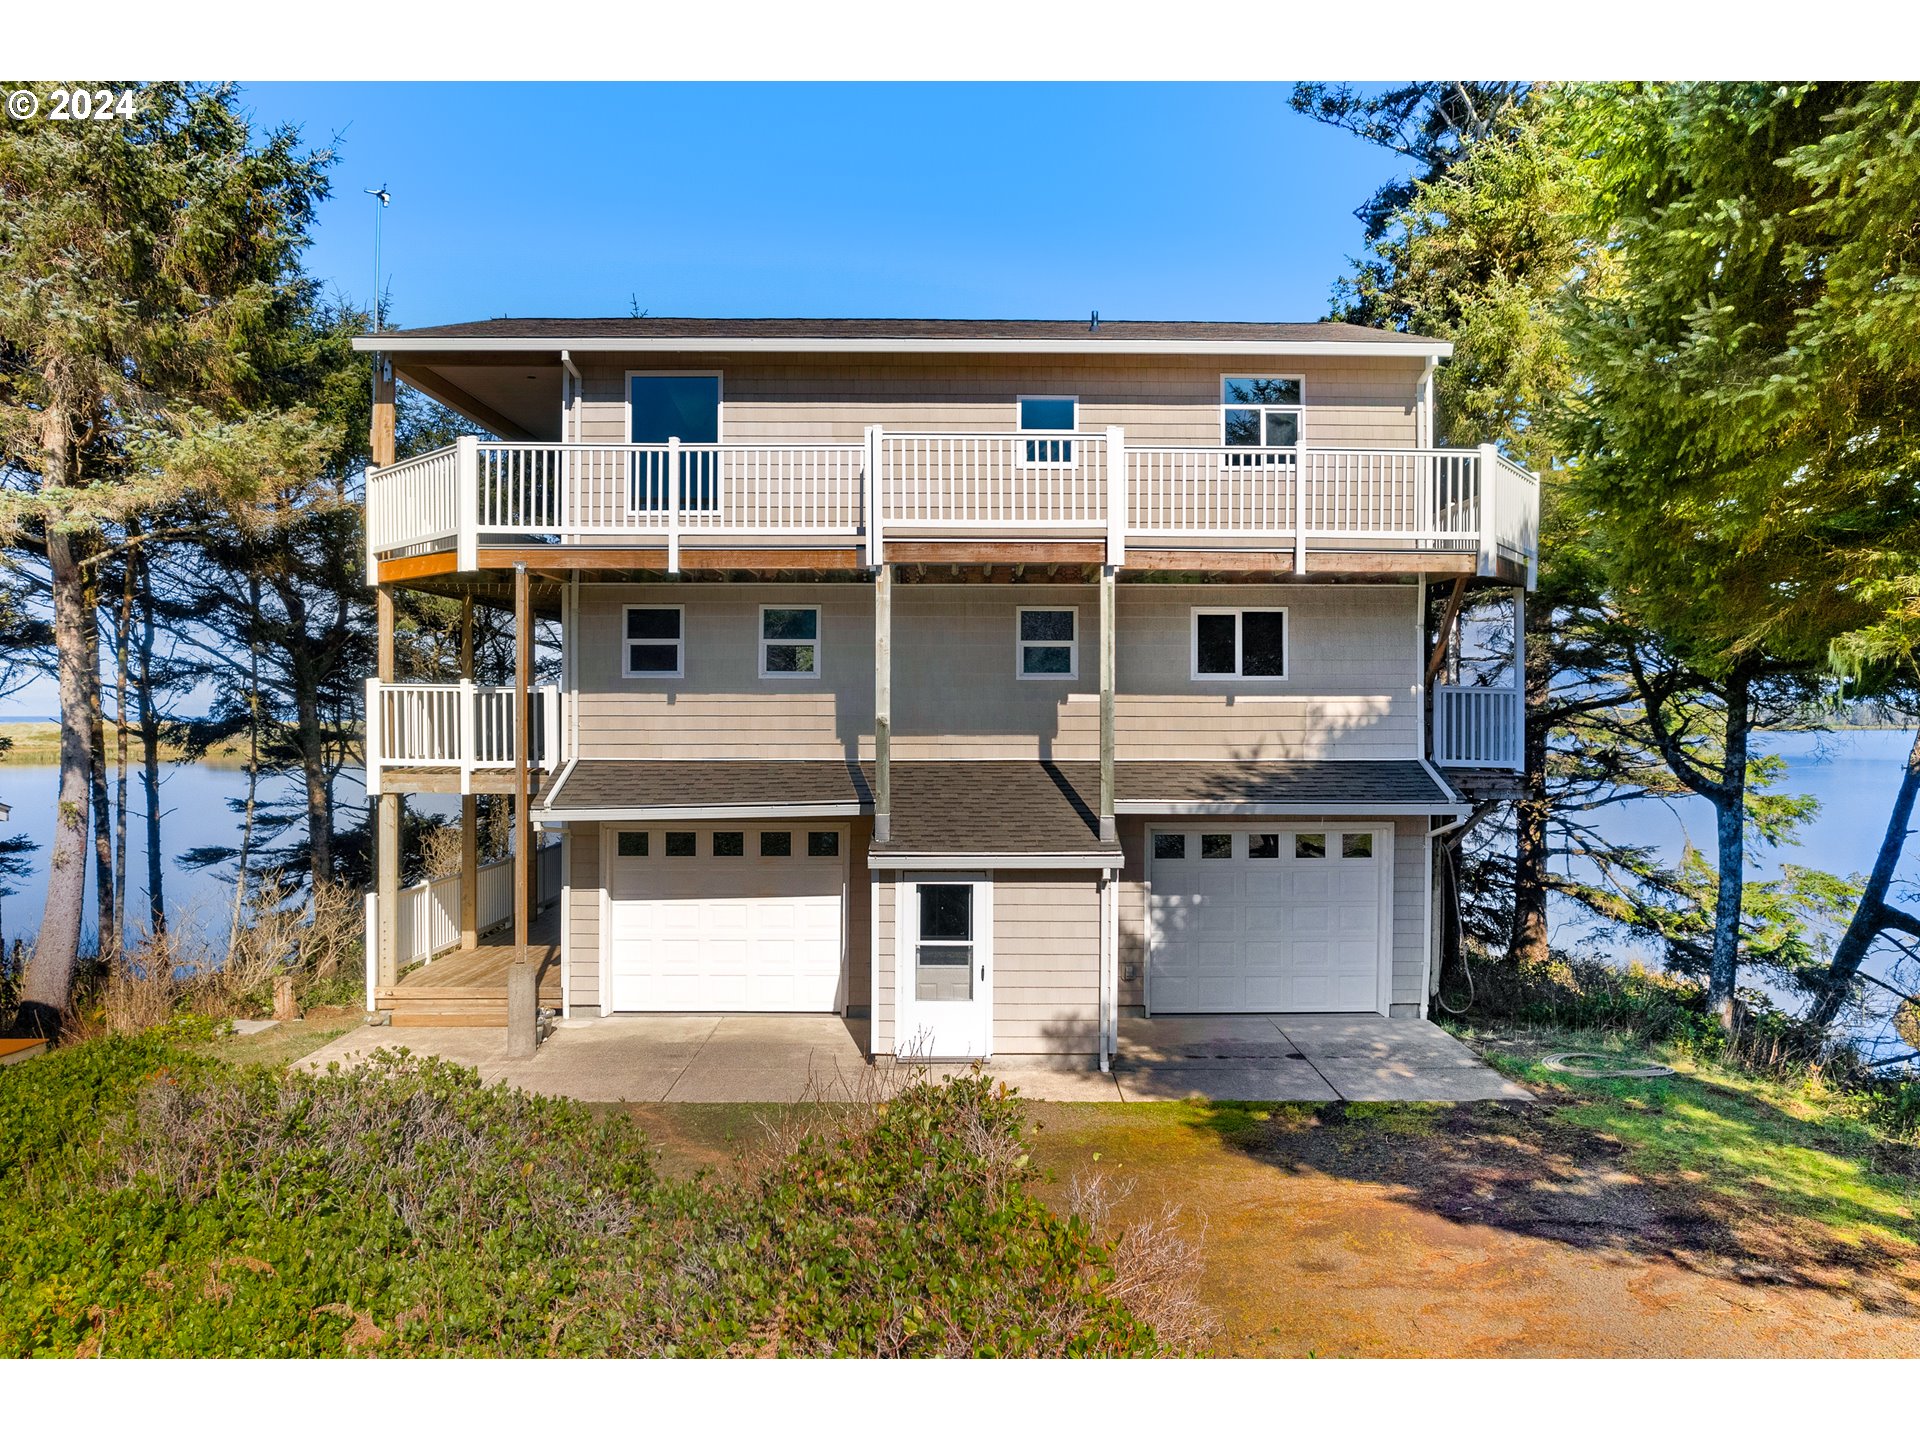 6080 7TH ST NW, Cape Meares, OR 